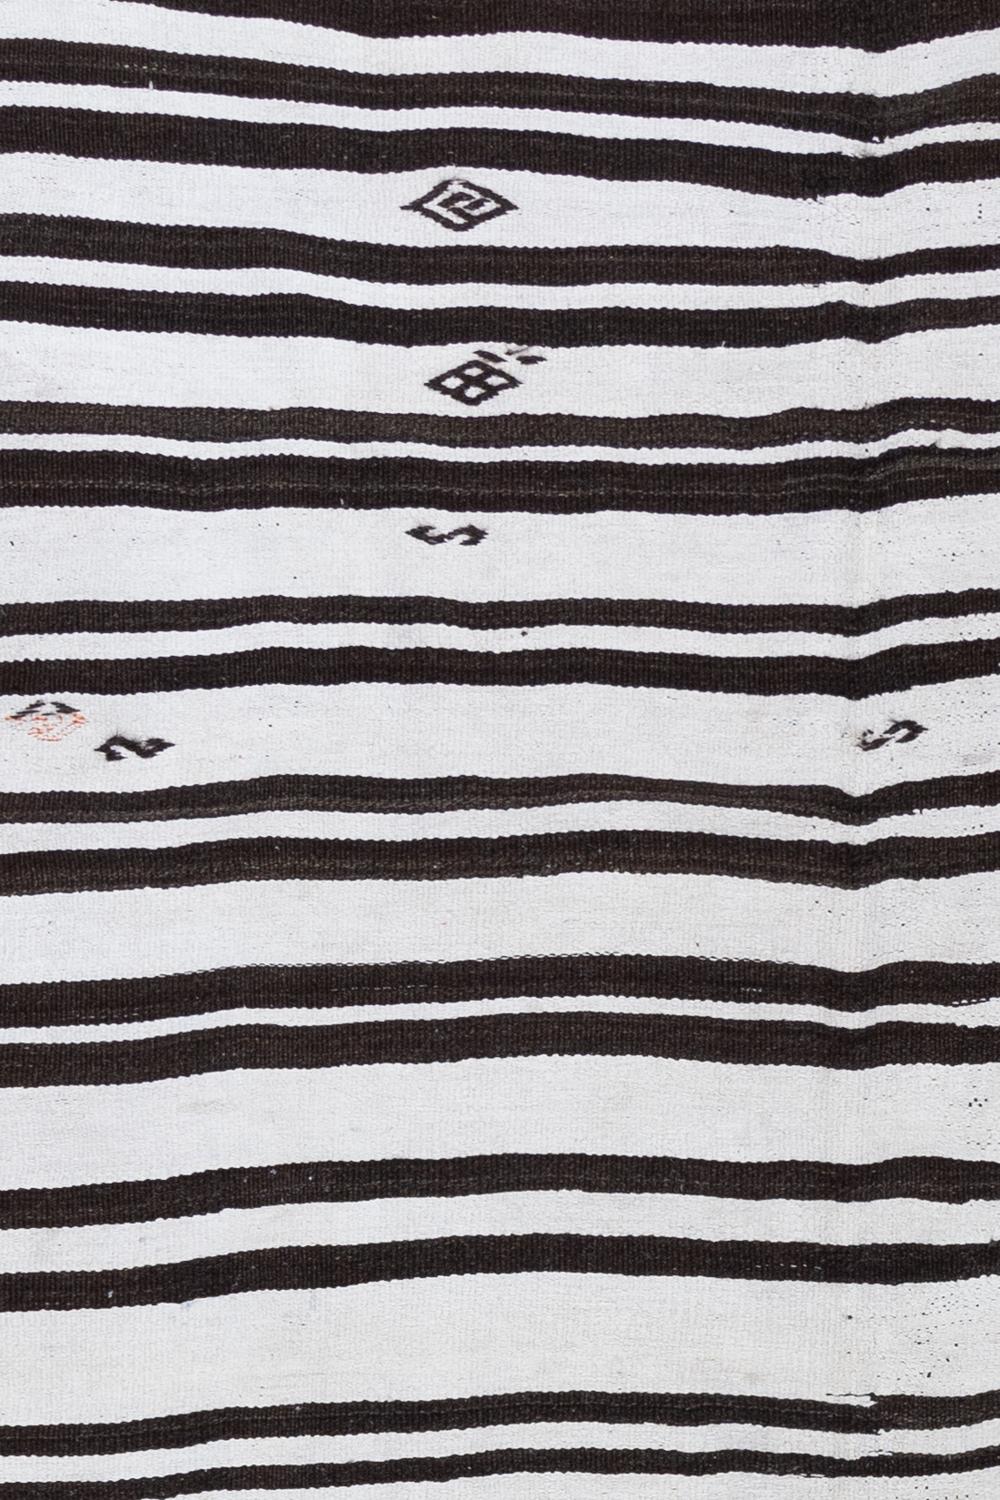 Age: Circa 1950

Colors: Washed black, Espresso, and bone, with a tiny pop of Terracotta. 

Pile: Flatweave

Wear Notes: 2

Material: Hemp, wool. 

Traditional hemp Kilim with contrasting dark stripes. The inclusion of ribbon and evil eye symbols